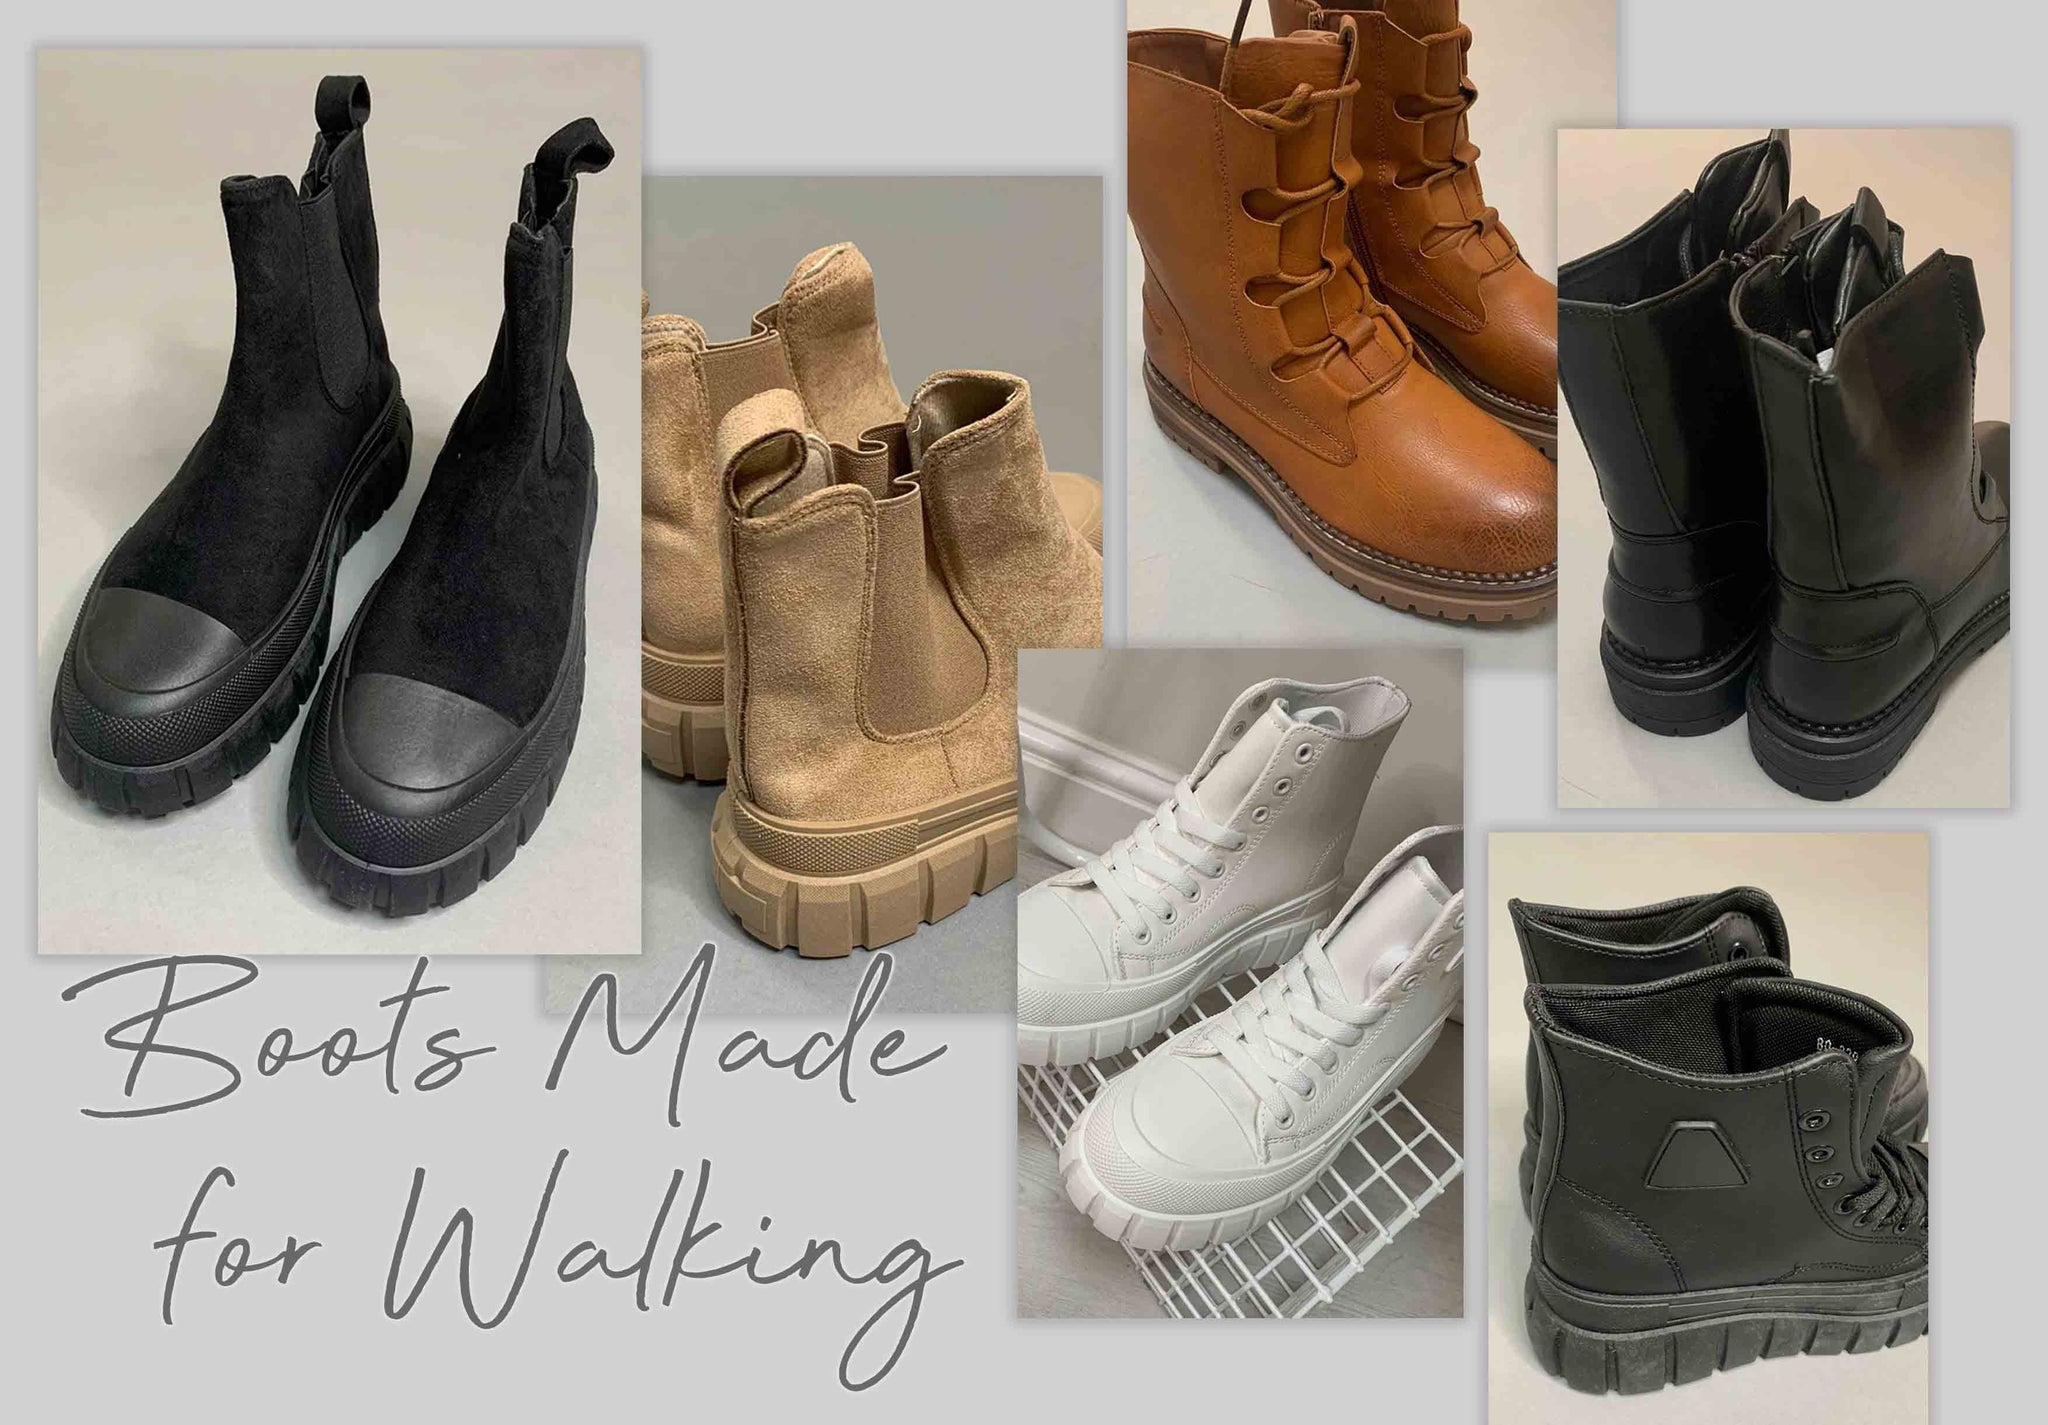 Sally’s Edit: Boots Made for Walking